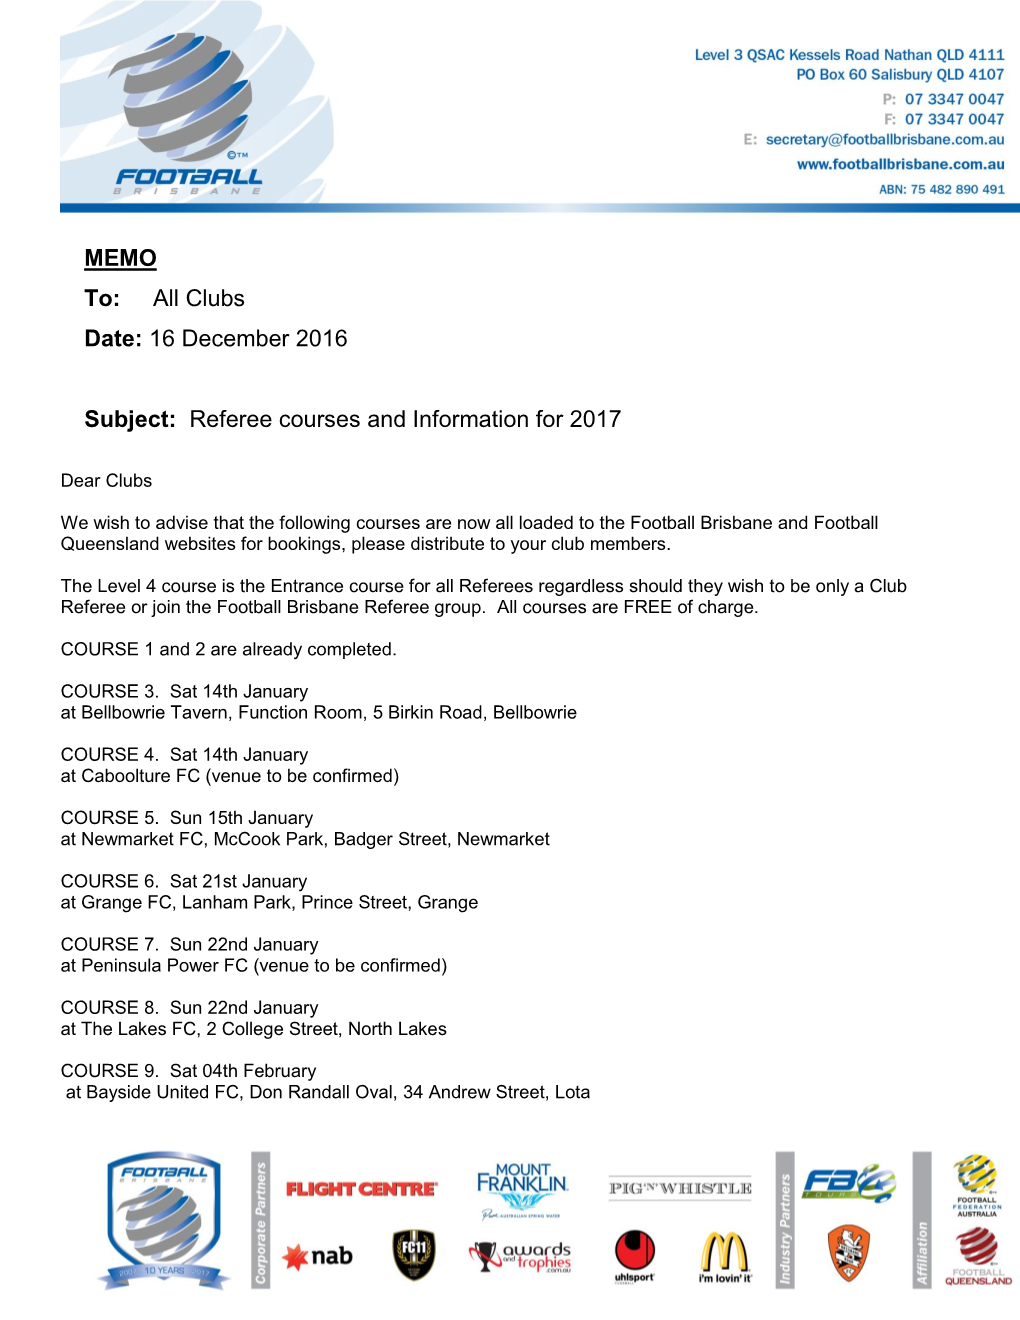 MEMO To: All Clubs Date: 16 December 2016 Subject: Referee